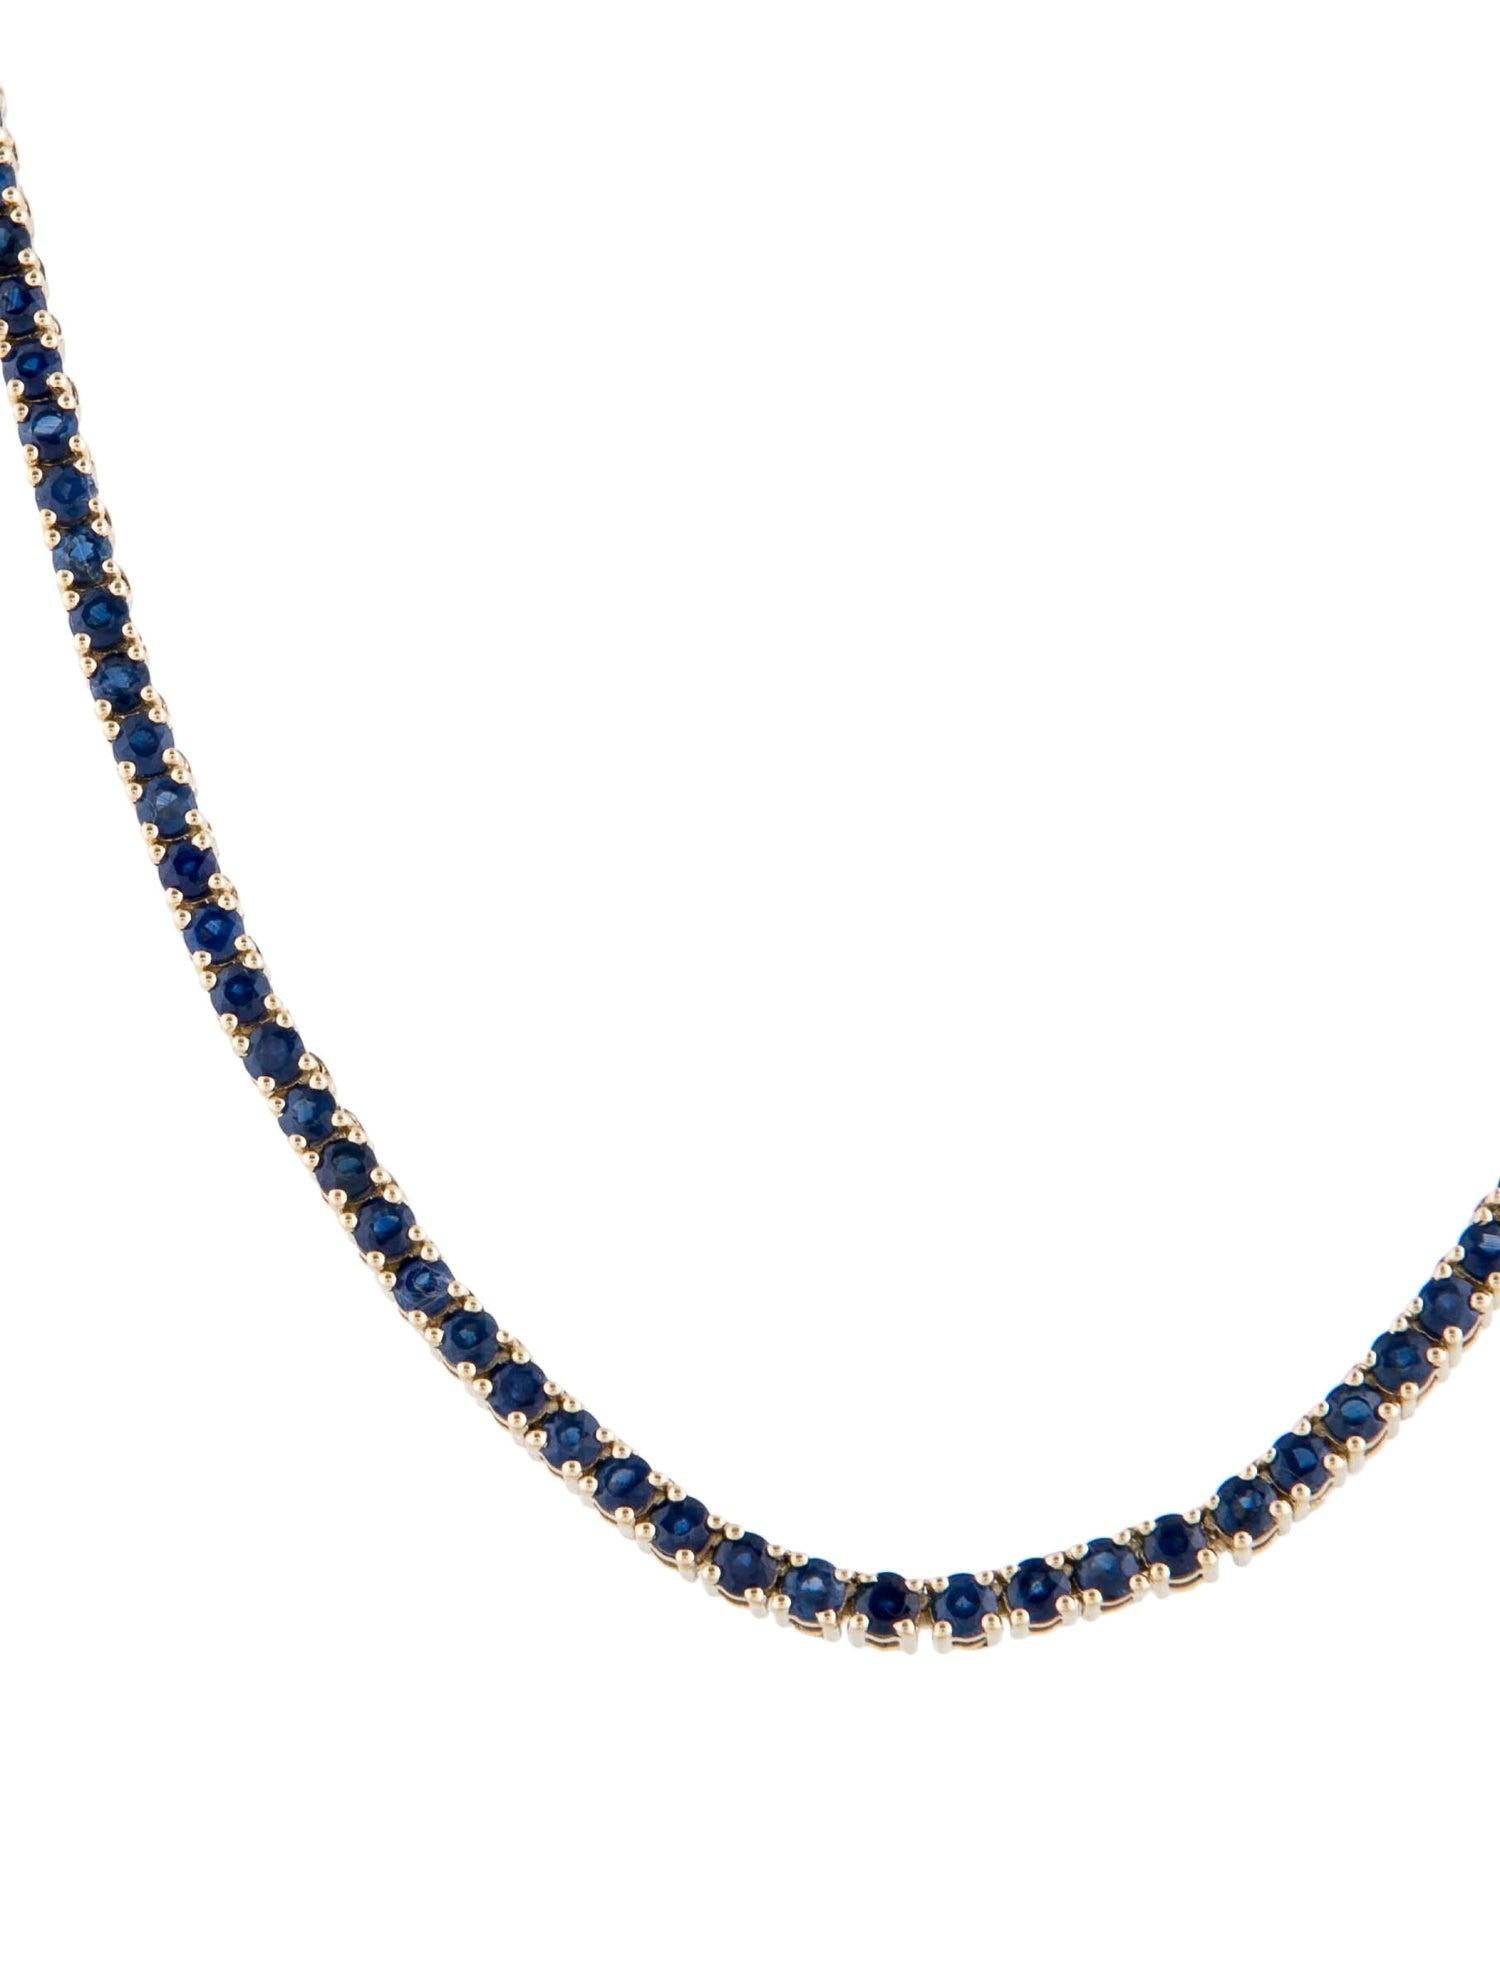 Women's 14K Sapphire Chain Necklace 7.03ctw  Stunning Jewelry Piece for Elegance For Sale